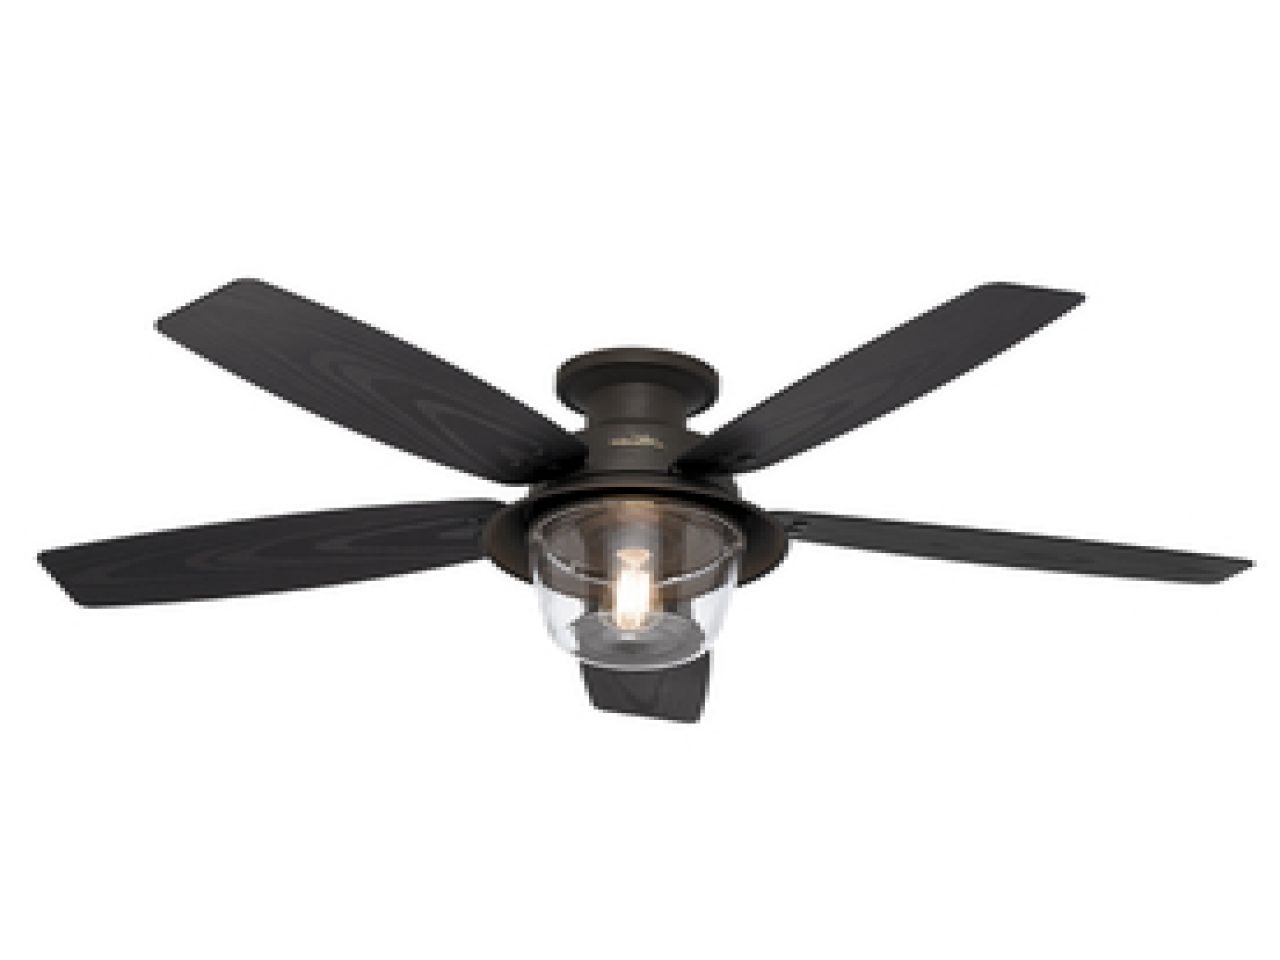 Outdoor Ceiling Fans With Wet Rated Lights For Well Known Outdoor Ceiling Fans Lights Wet Rated • Ceiling Lights (View 3 of 20)